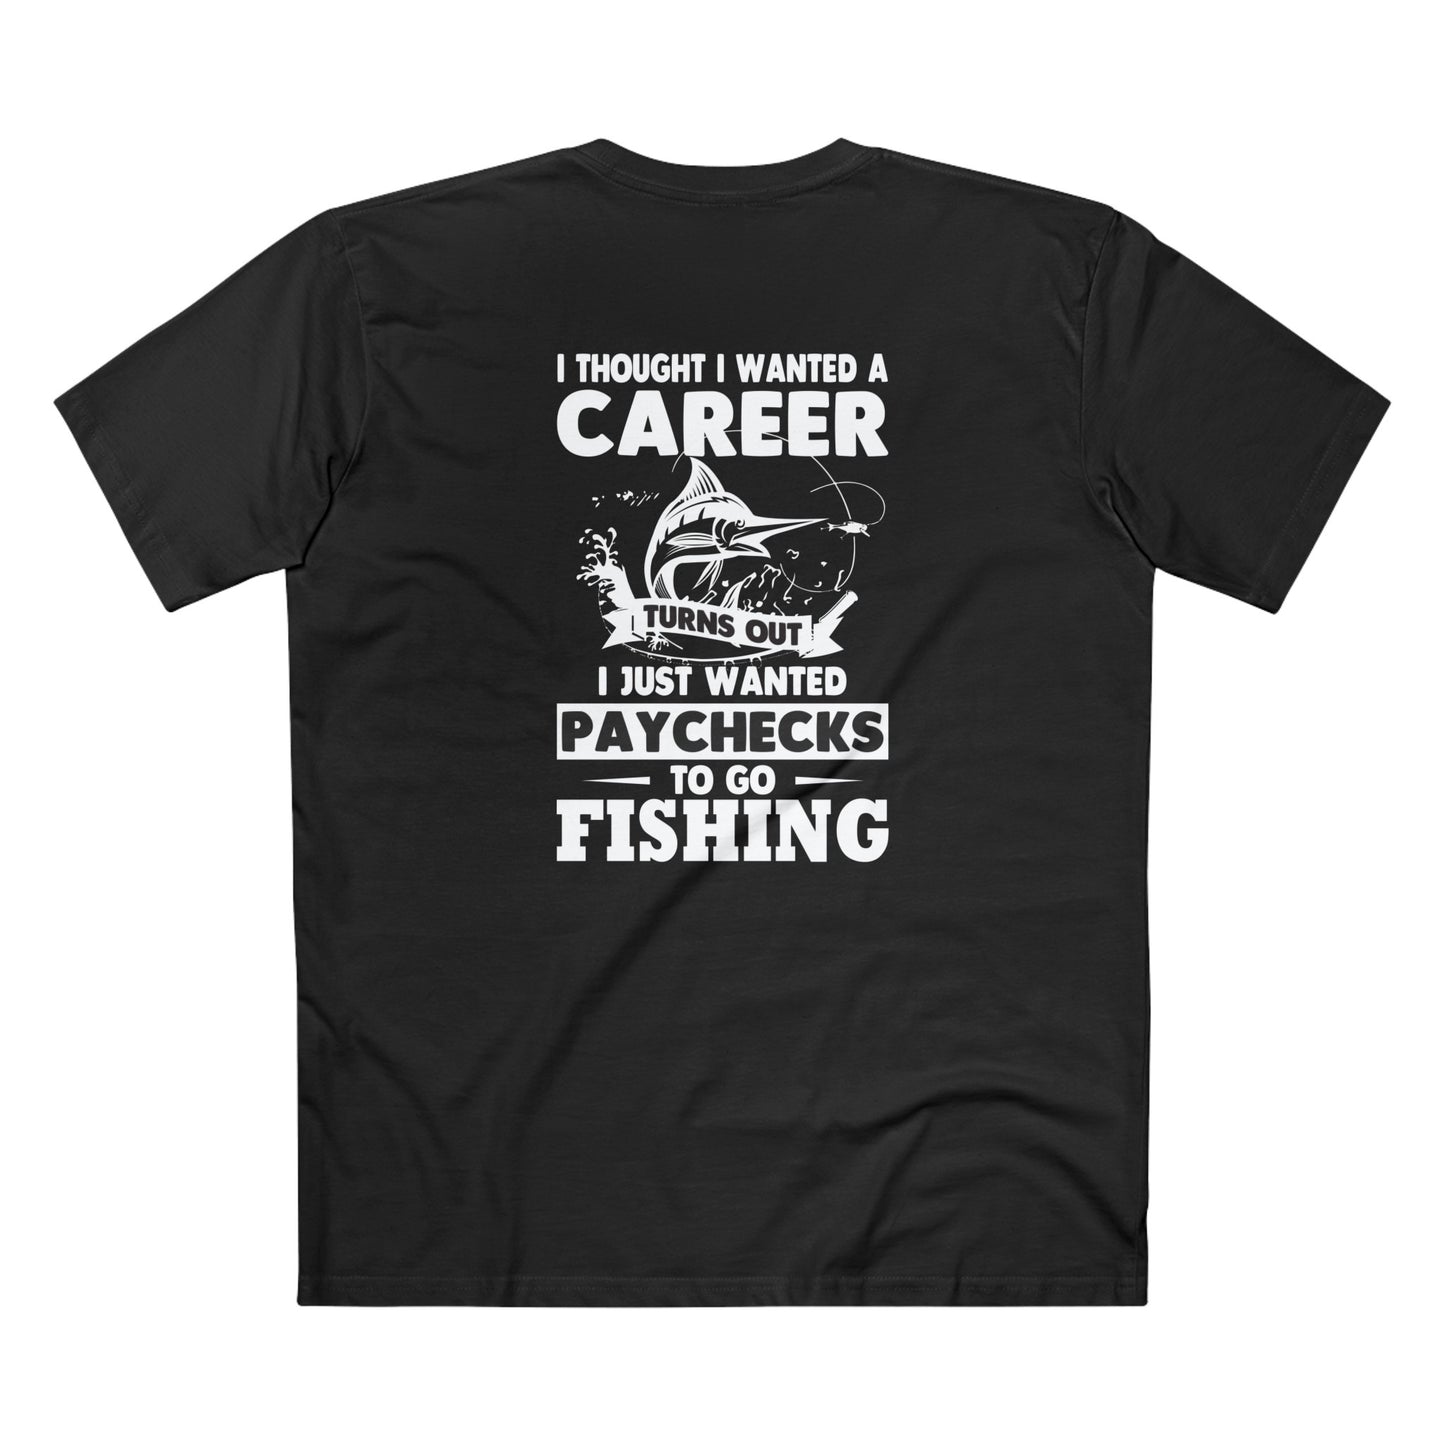 I Thought I Wanted A Career Turns out I Wanted Paychecks To Go Fishing